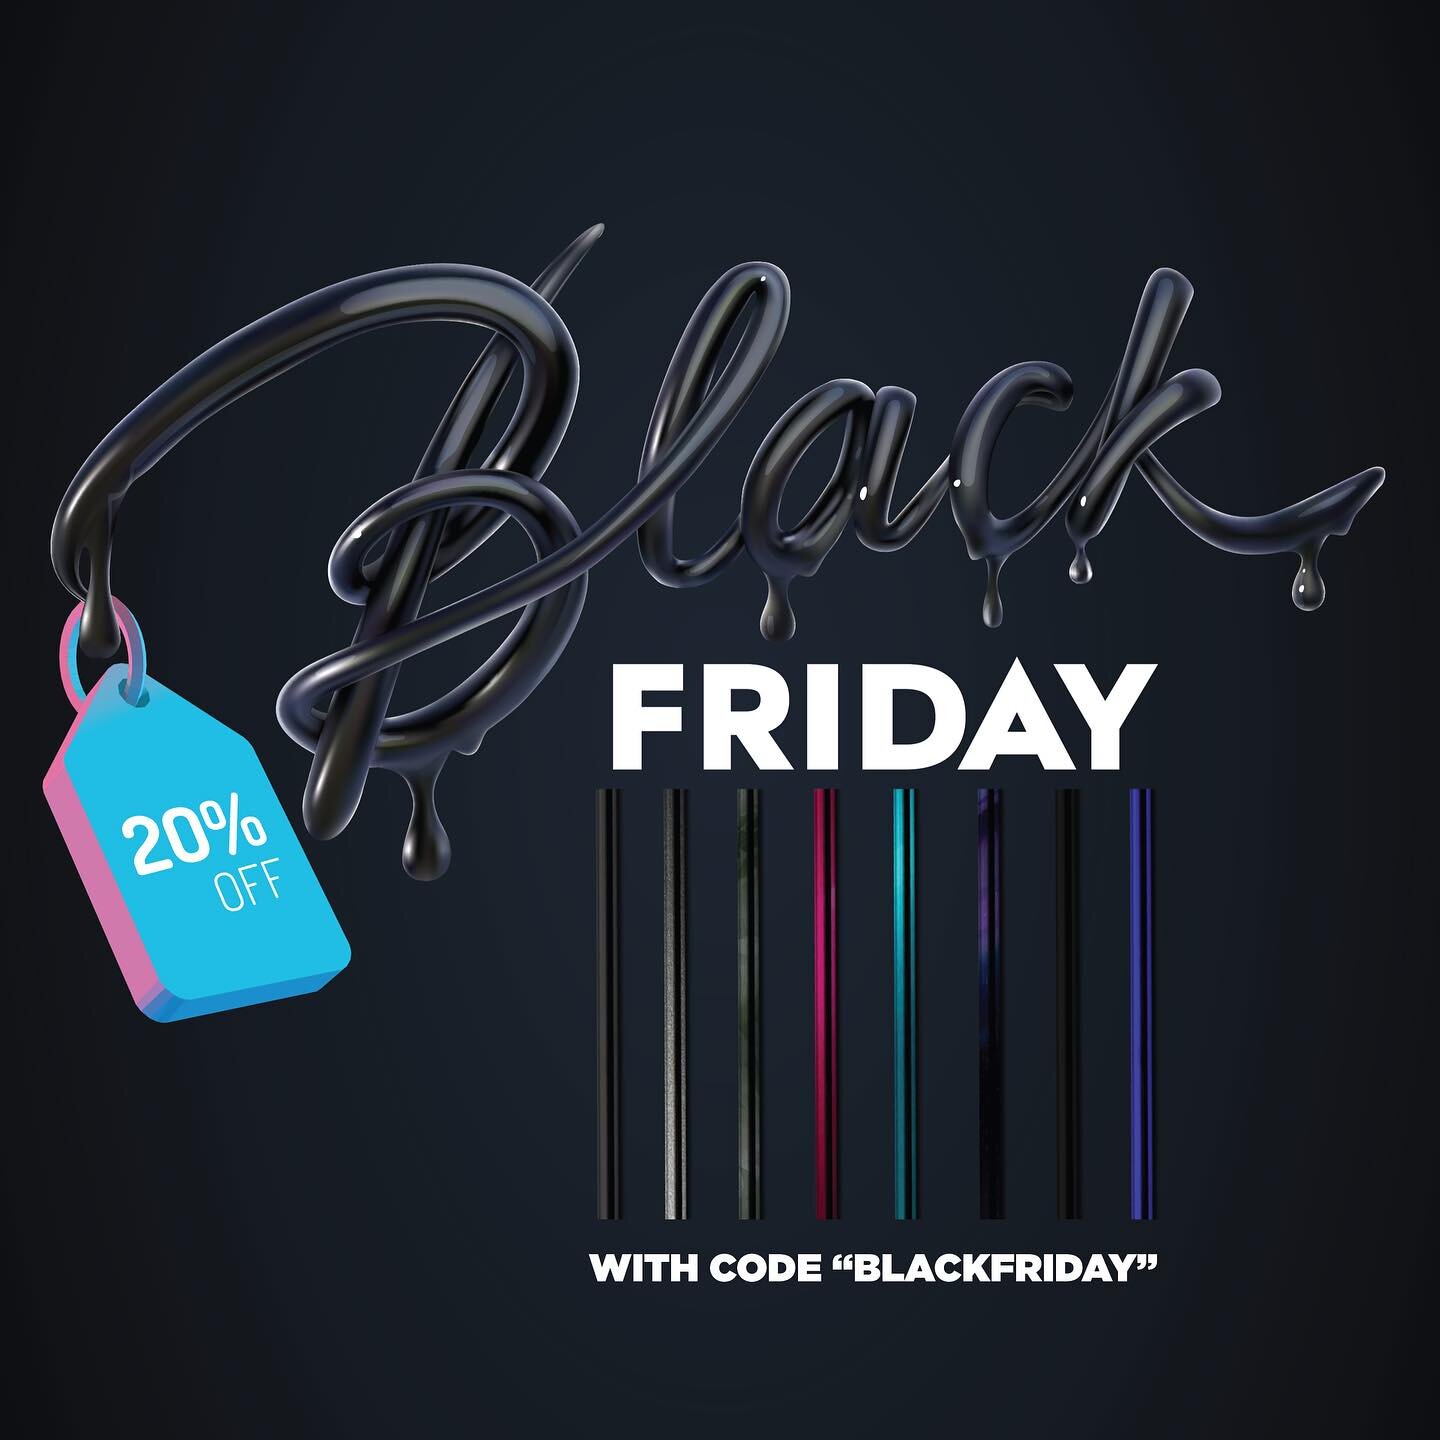 BLACK FRIDAY - 20% OFF 

Code - BLACKFRIDAY 

Over and out.